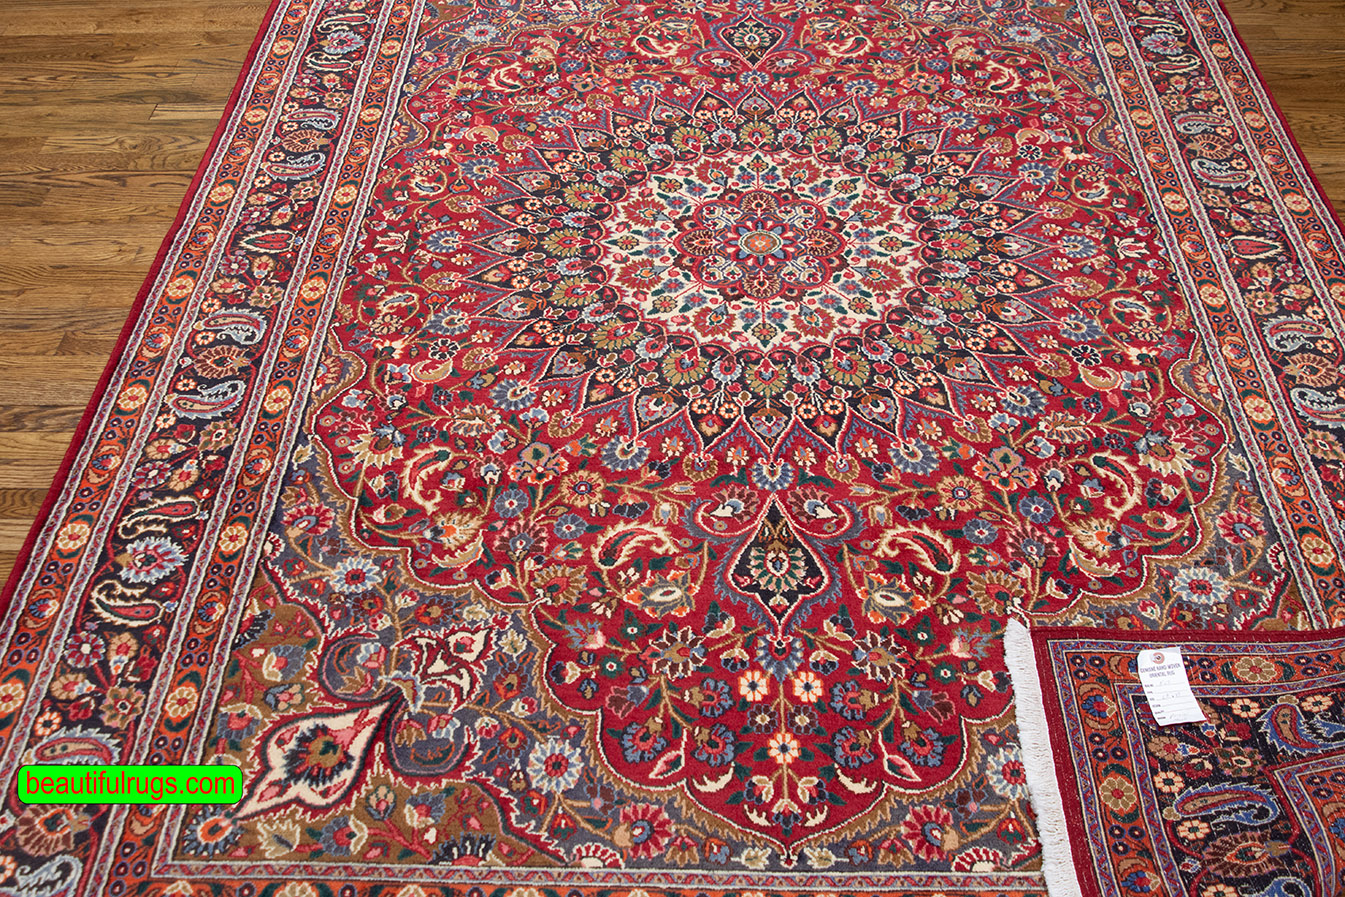 10 Area Rugs That Are on Sale at  for Up to 75% Off